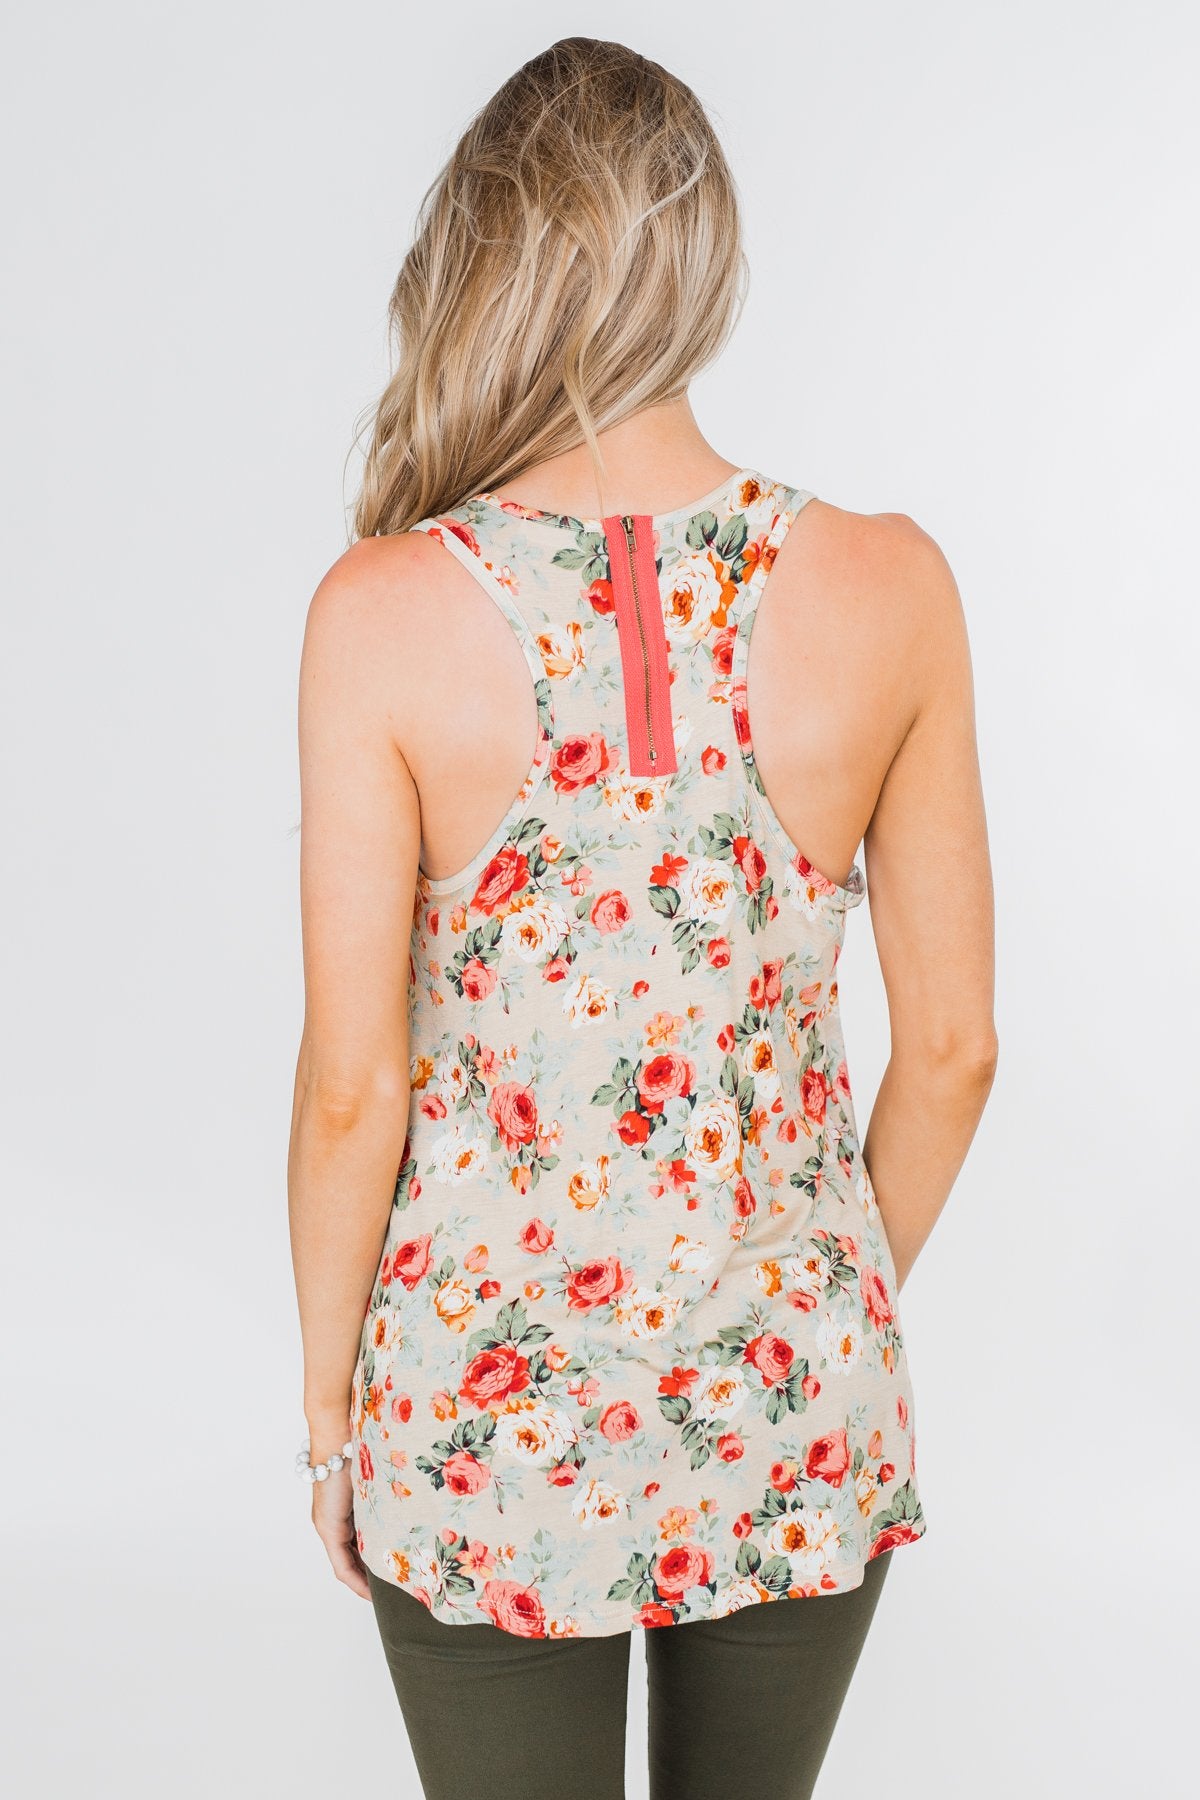 Next to You Floral Tank Top- Light Taupe